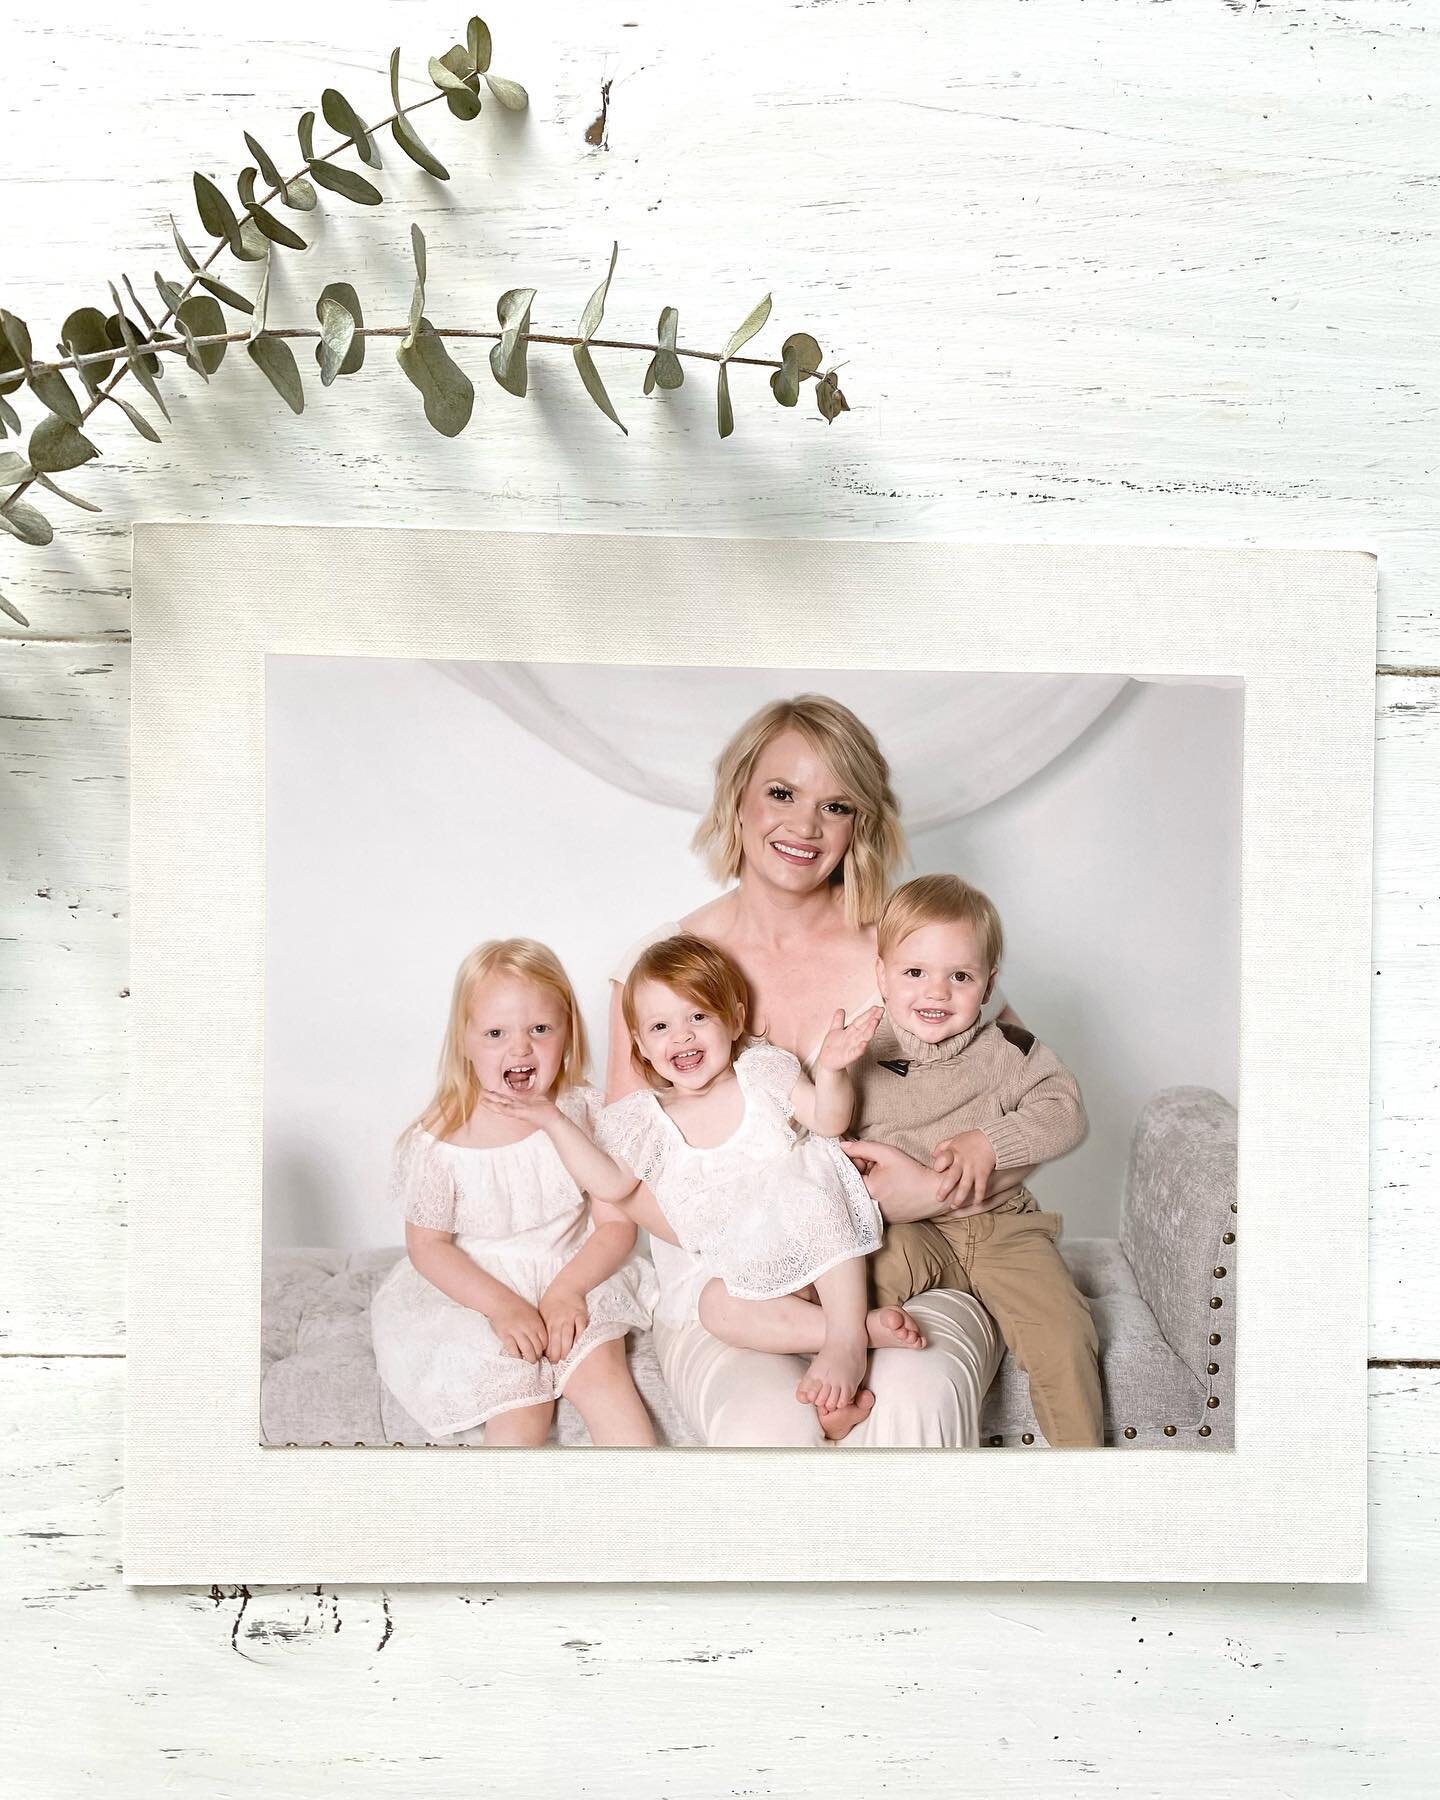 Do you want to receive a complimentary print of you favorite image from the Motherhood Event?

All you have to do is sign up for the event by 1/22/23.

Complimentary prints are a beautiful bonus for all my action taking moms out there. 

Now who&rsqu